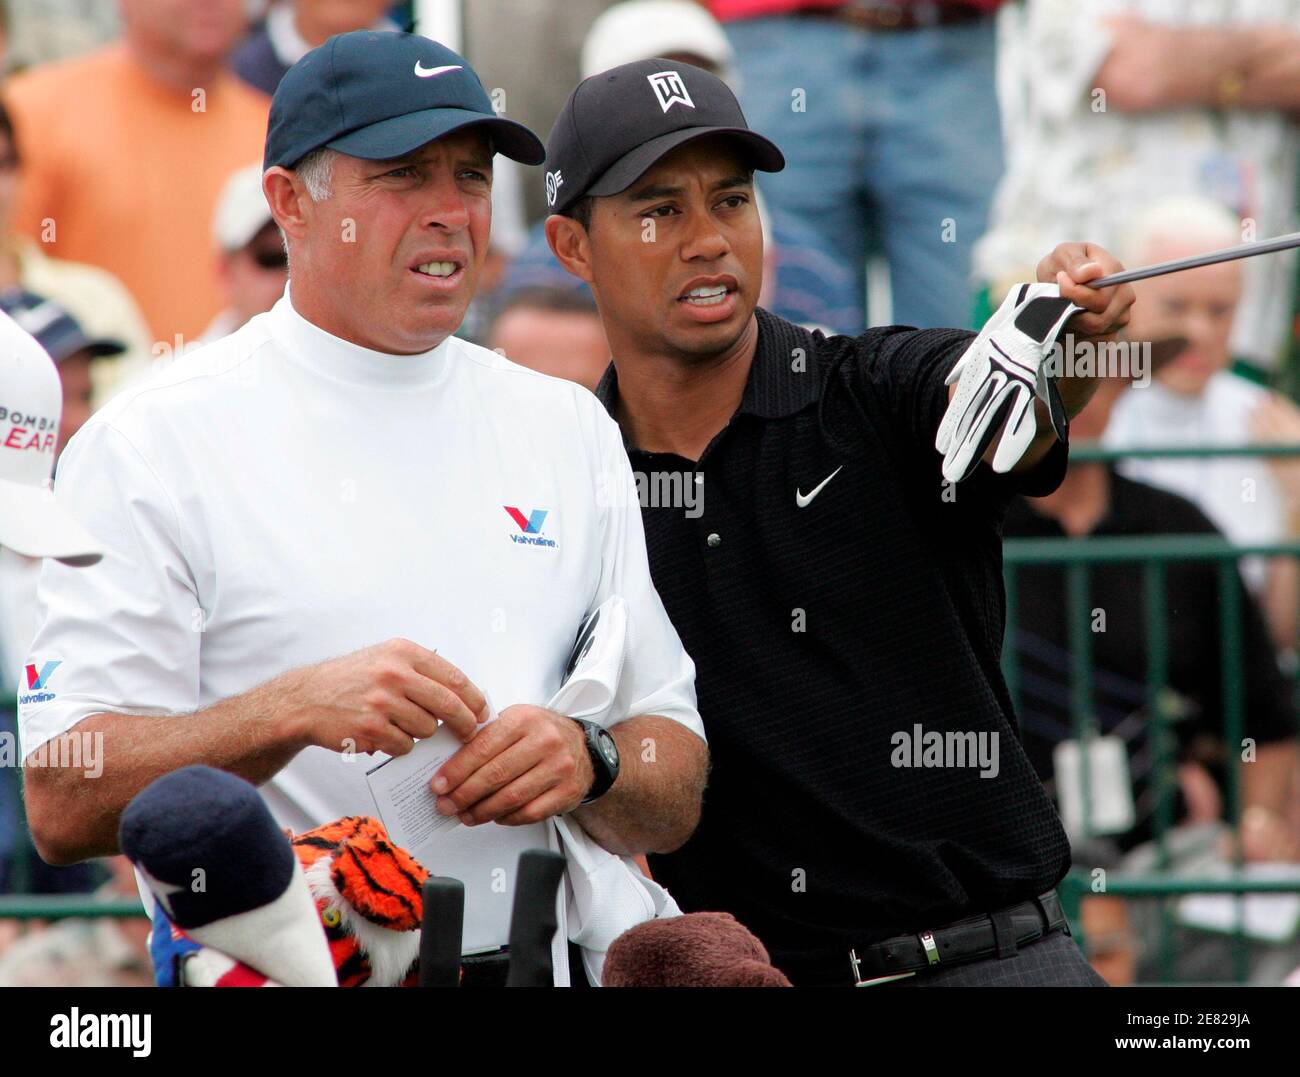 Tiger Woods (R) chats with his caddy Steve Williams before teeing off on the first hole during the second round of the Arnold Palmer Invitational golf tournament at the Bay Hill Club in Orlando, Florida March 16, 2007. REUTERS/Rick Fowler (UNITED STATES) Stock Photo